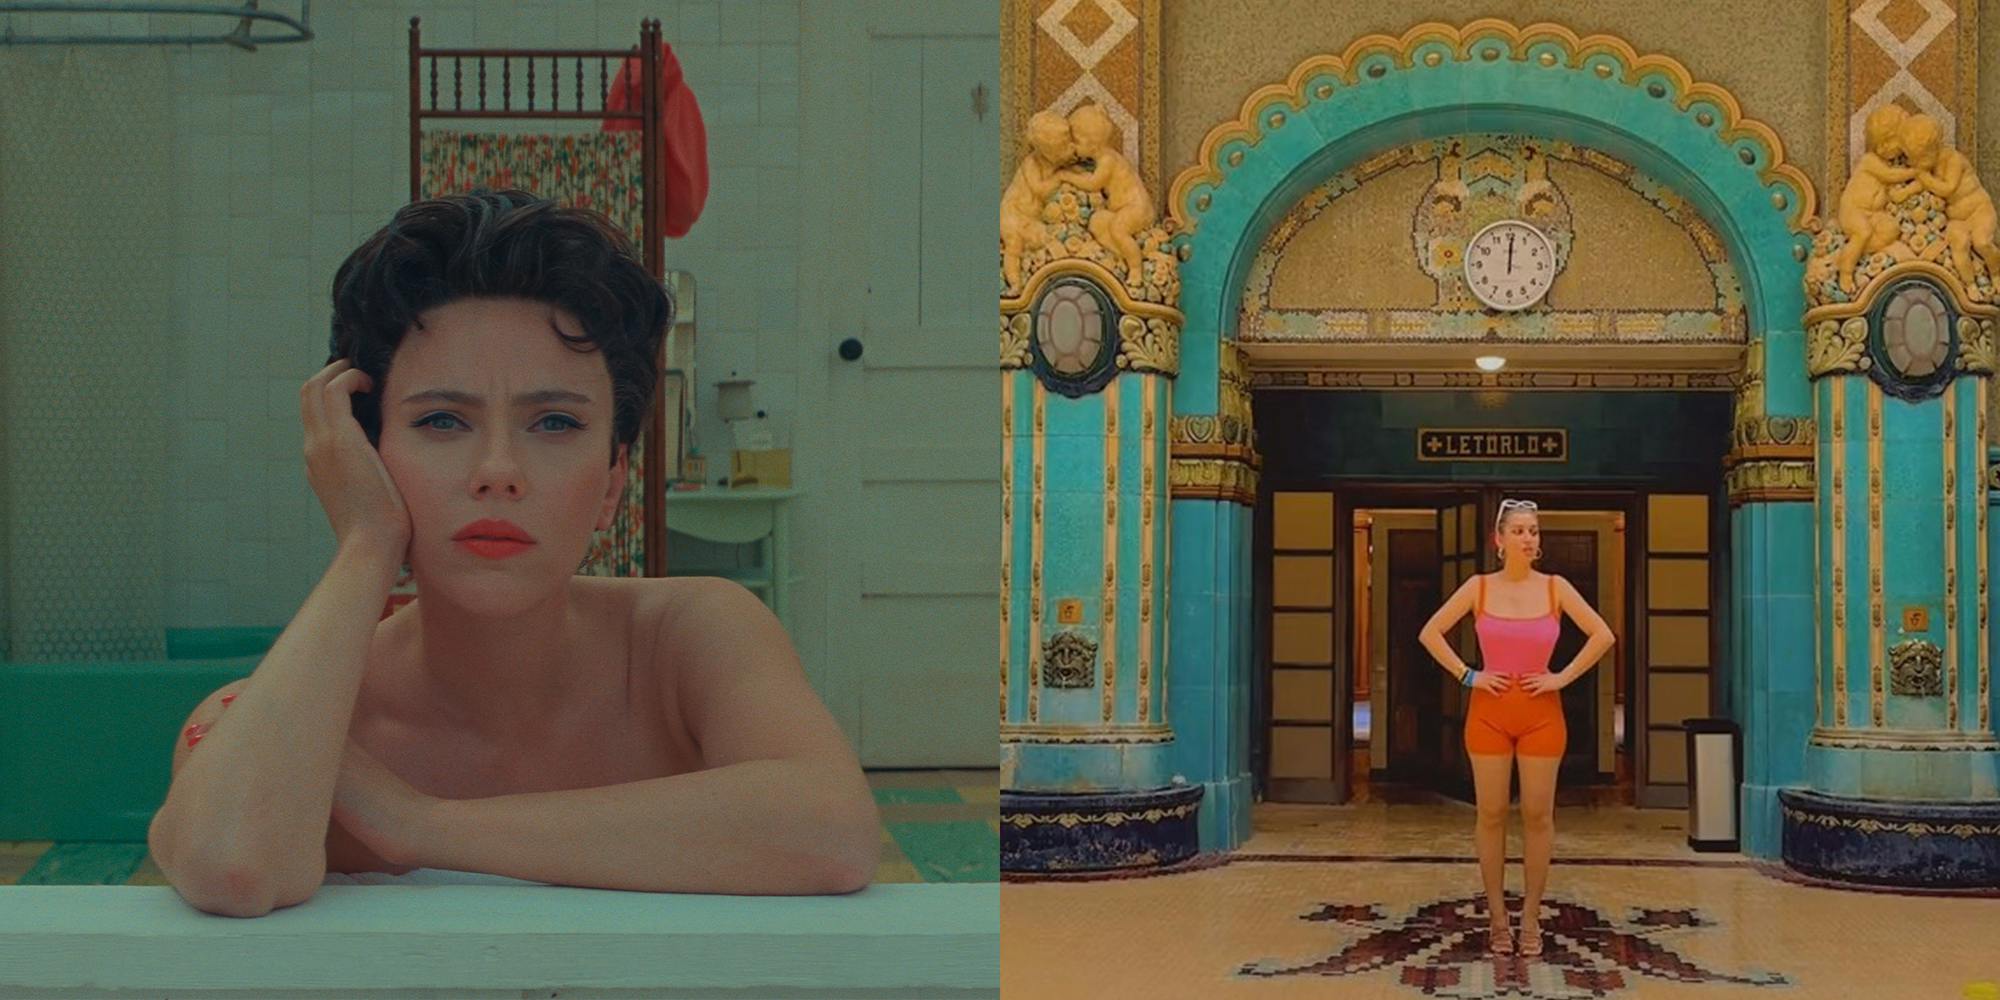 Scarlett Johansson stars as "Midge Campbell" in writer/director Wes Anderson's ASTEROID CITY, a Focus Features release. TikToker irinahp imitating a Wes Anderson film